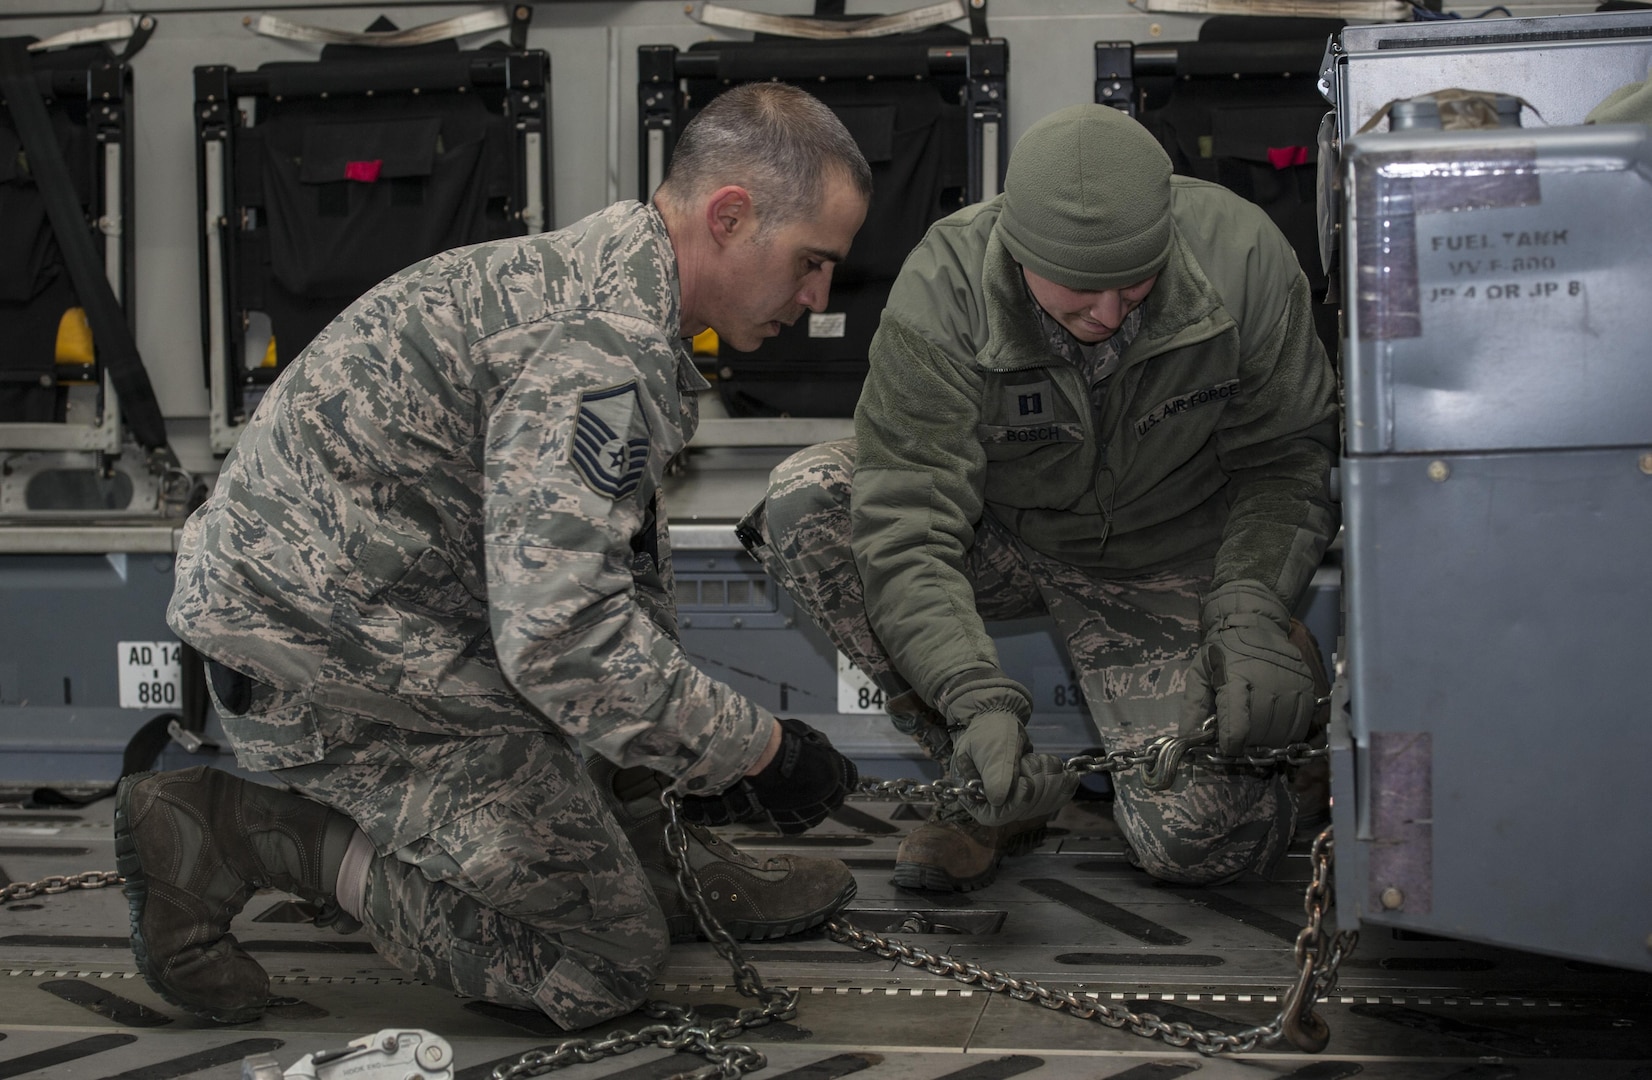 (From left) Master Sgt. Frank Lopez, 5th Logistics Readiness Squadron small air terminal section chief, and Capt. Nicholas Bosch, 5th LRS deployment distributions flight commander, secure cargo onto a C-17 Globemaster III at Minot Air Force Base, N.D., March 3, 2017. The mass deployment included more than 400 deployers and 290,000 pounds of cargo. (U.S. Air Force photo/Airman 1st Class Jonathan McElderry)